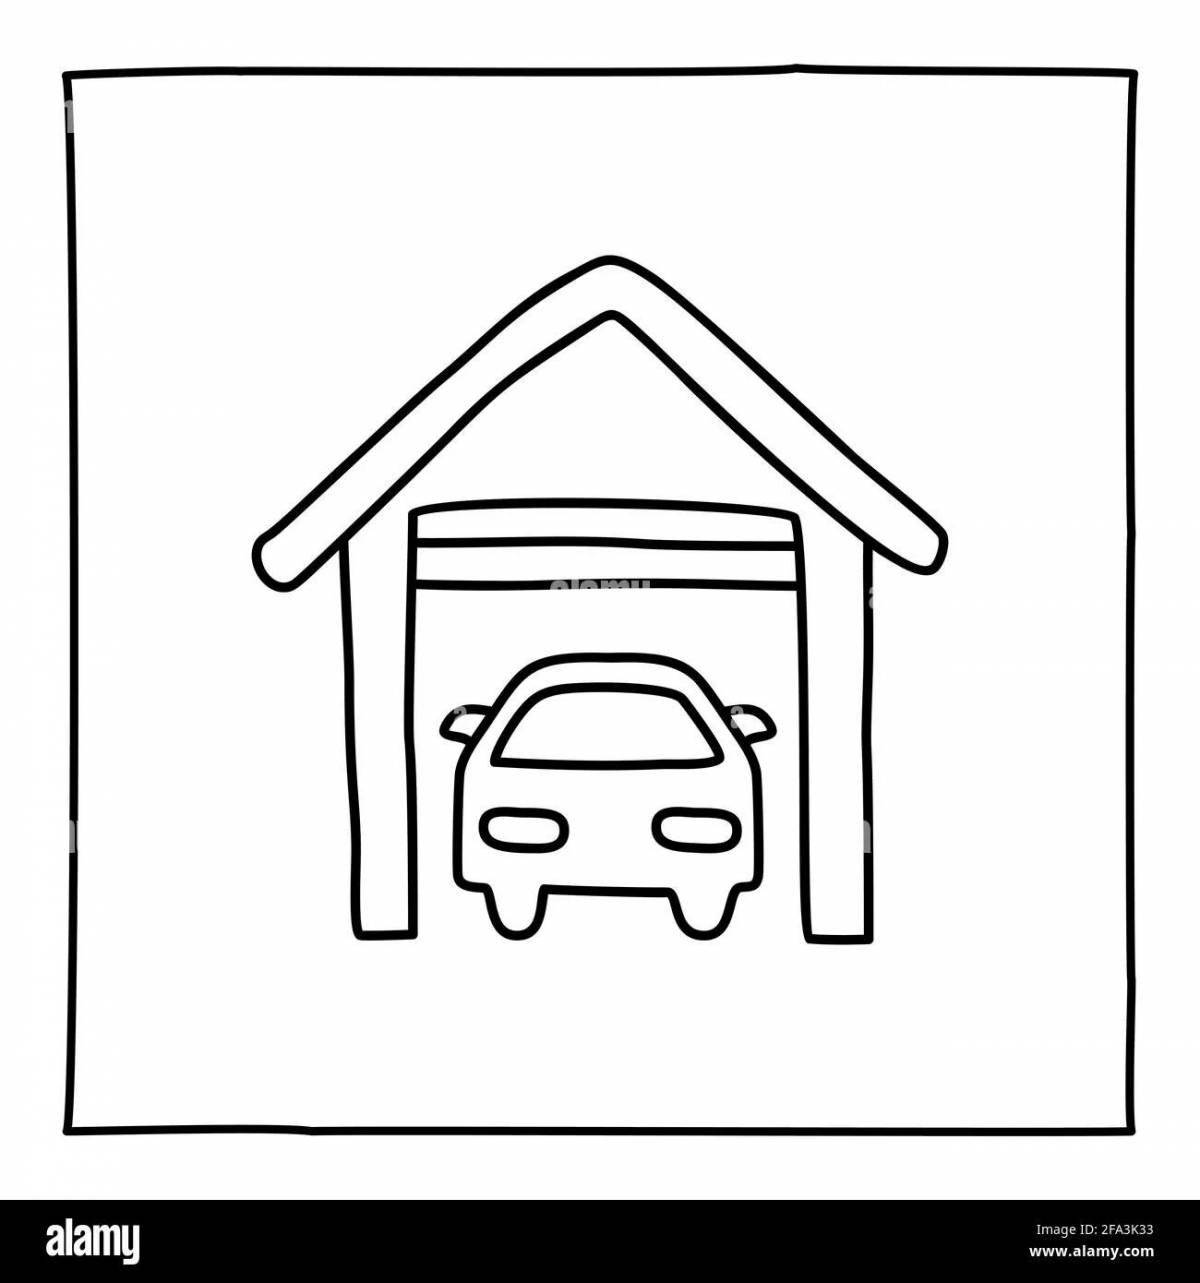 Outstanding garage coloring page for kids